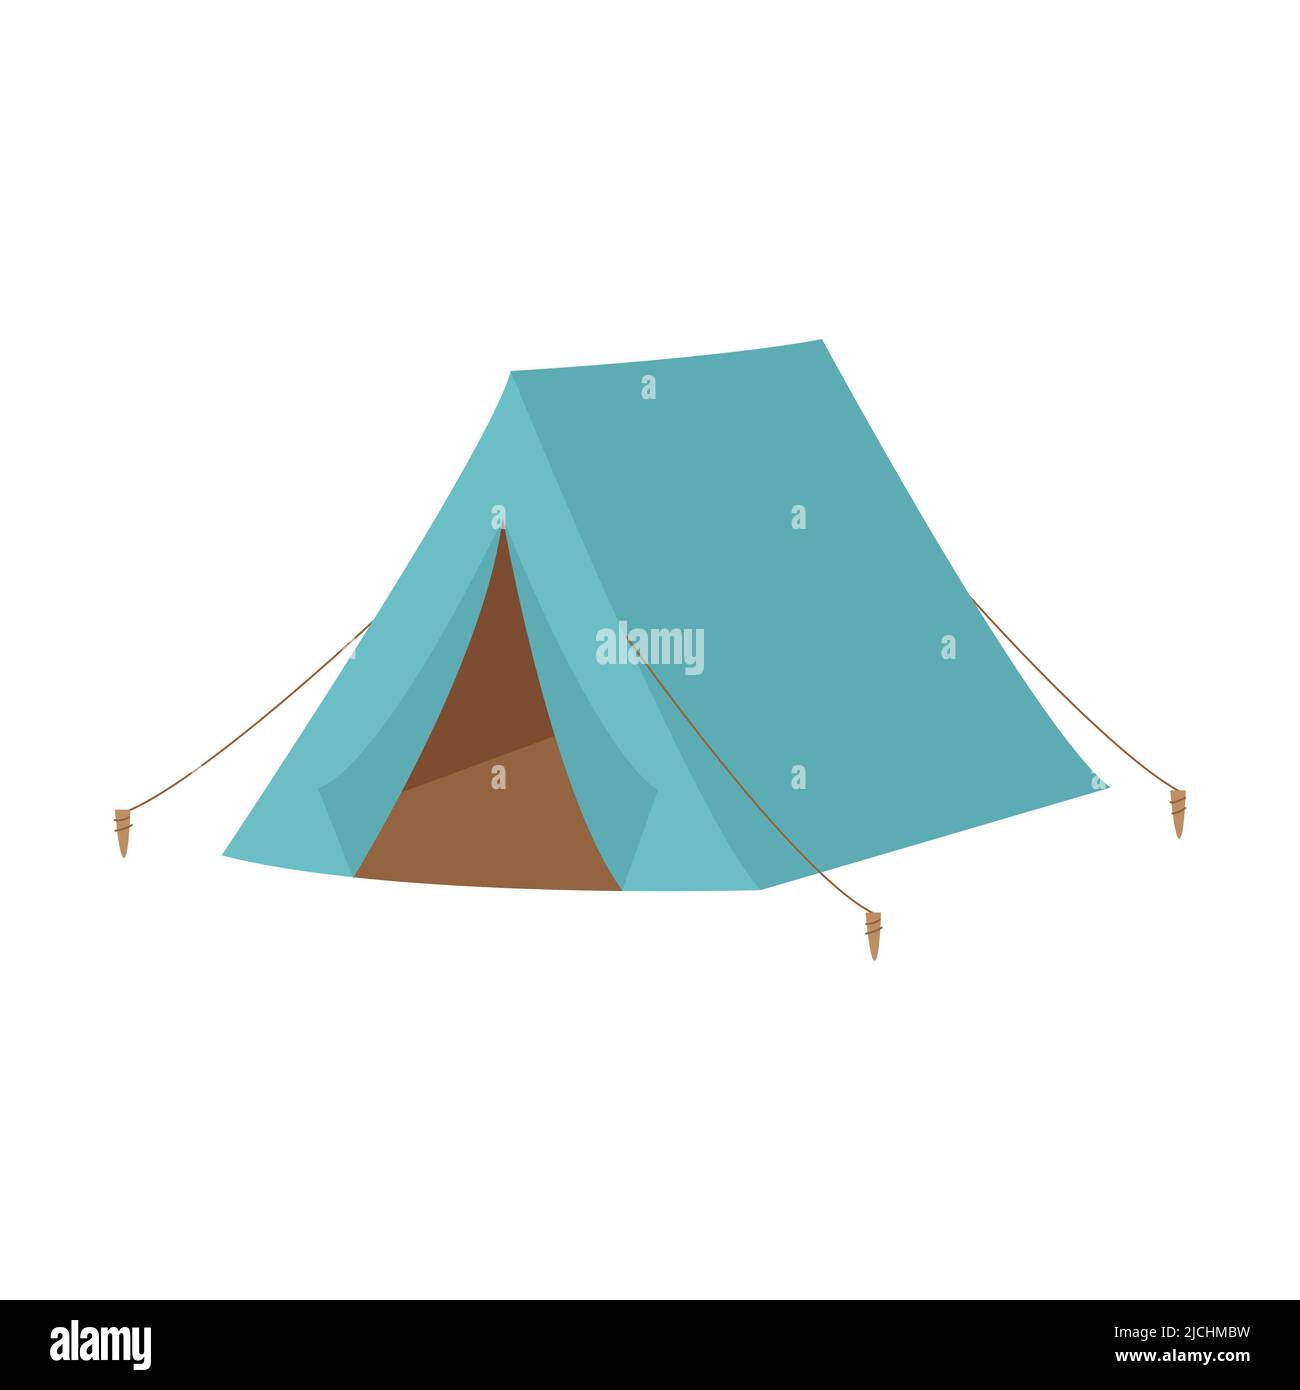 Camping tent. Equipment for picnics, outdoor recreation, travel, hiking. Flat vector illustration isolated on a white background. Stock Vector